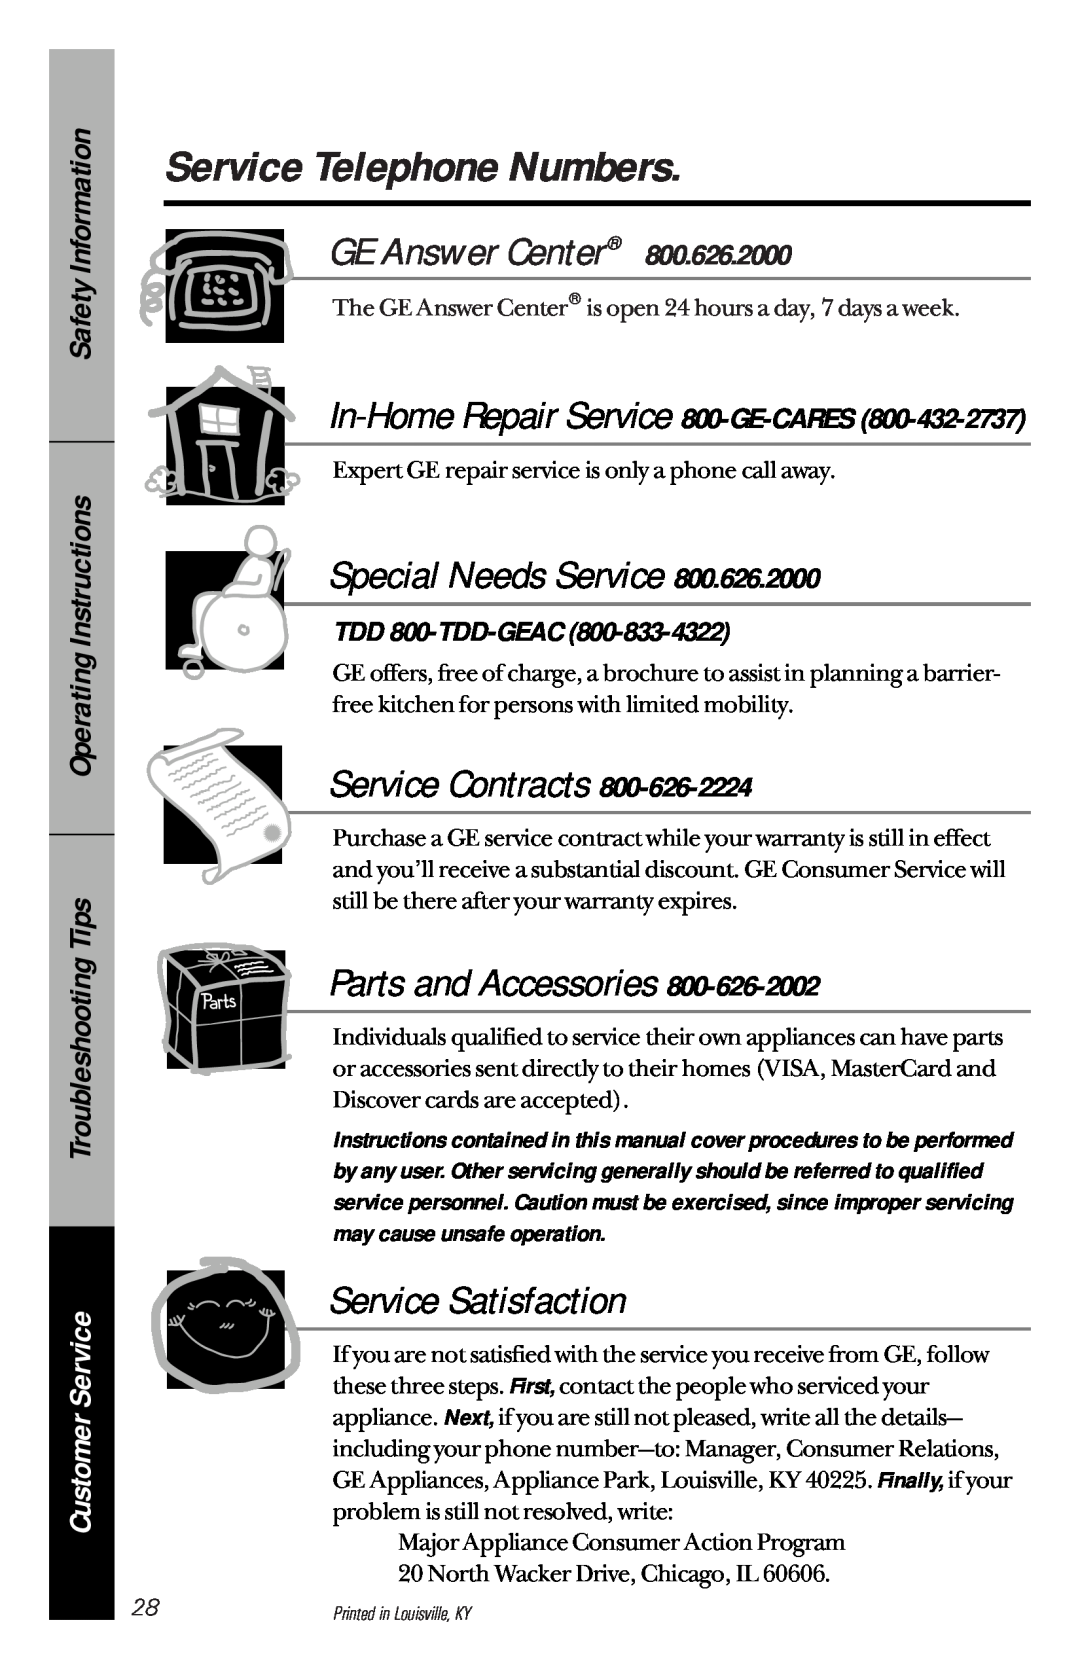 GE GSD2110, GSD3130 Service Telephone Numbers, Customer Service, In-HomeRepair Service 800-GE-CARES, TDD 800-TDD-GEAC 